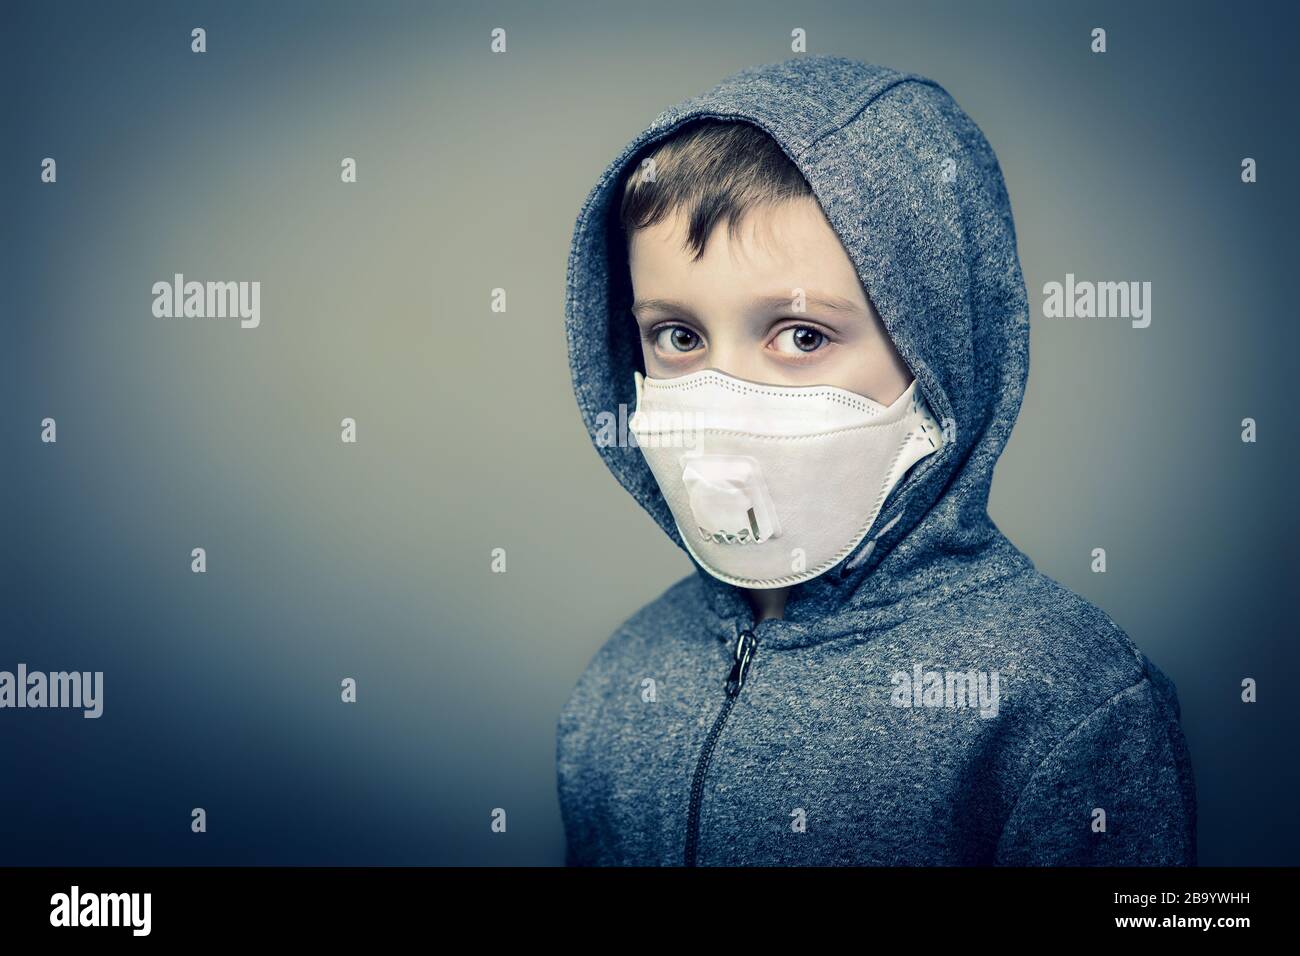 portrait of a 6 year old caucasian boy wearing a protective mask to defend himself from the coronavirus. health prevention and danger concept. Stock Photo